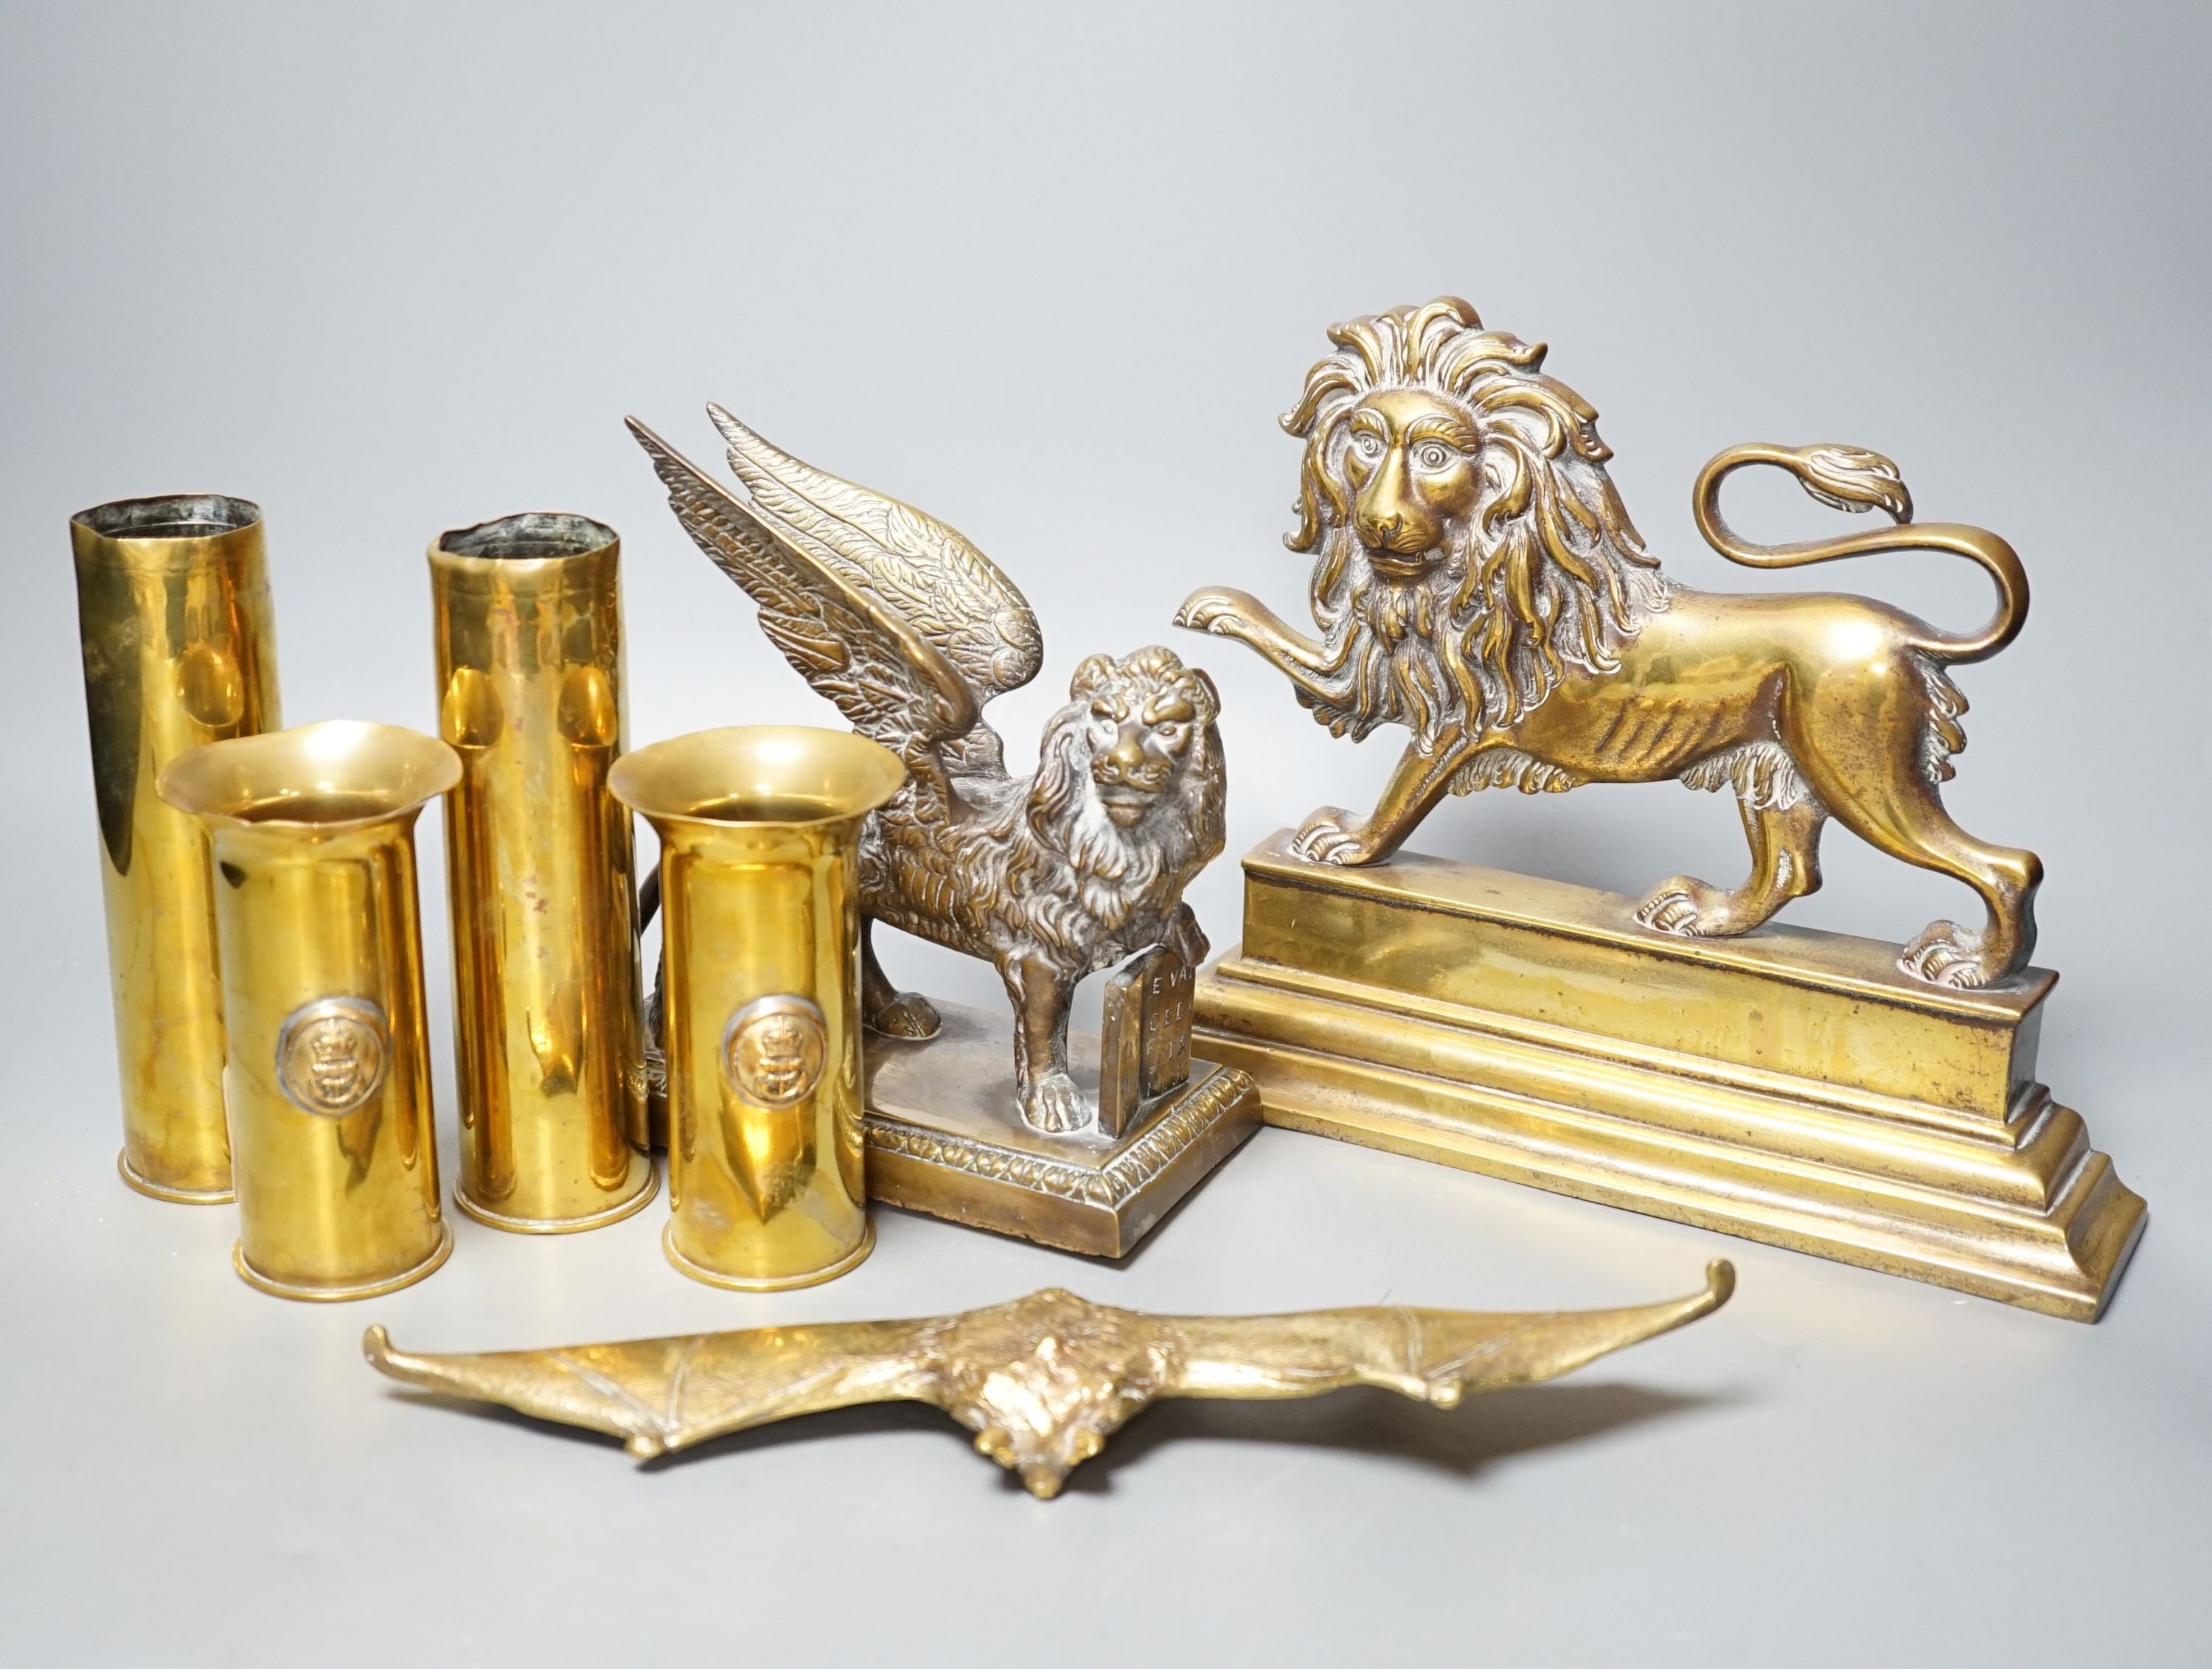 A brass ‘bat’ pin tray, two lion figures and sundry metalware, lion door stop 20 cms height x 25 cms width